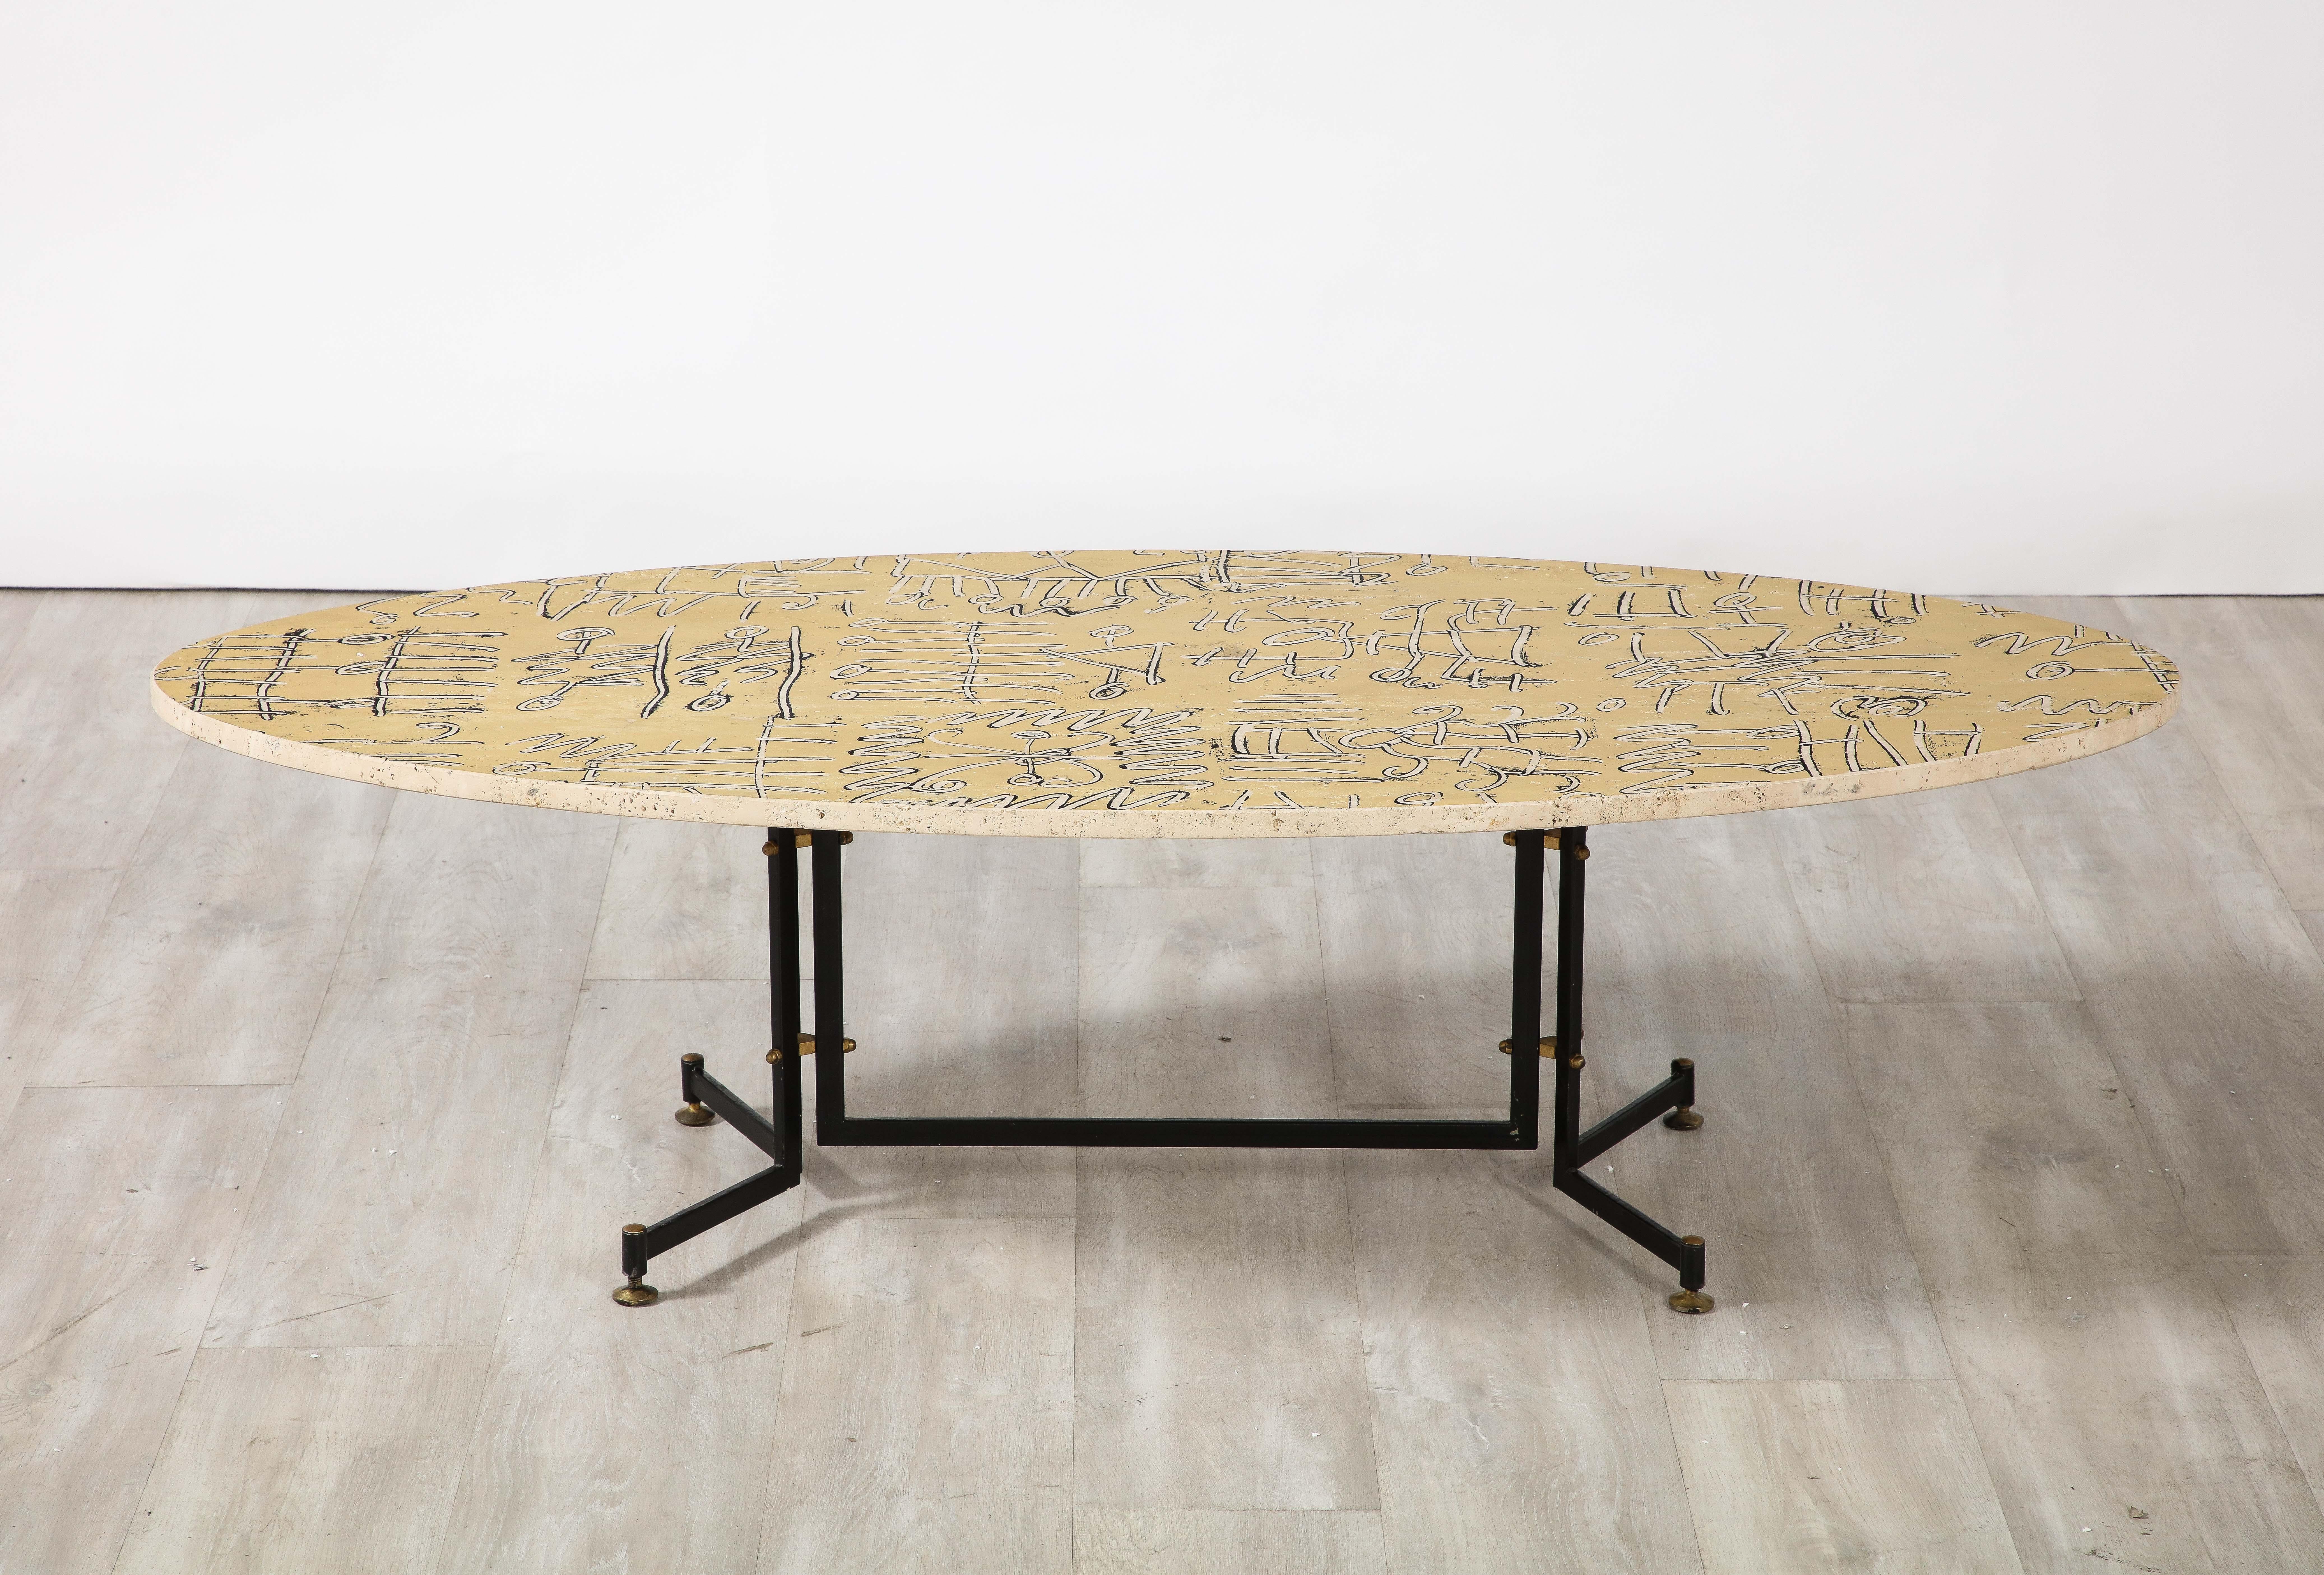 Italian 1950's coffee table, the oval travertine top is supported by a black enameled-steel base with charming brass accents. A highly unique piece, the surface of the travertine is painted with 'graffiti' style etchings. A truly one of a kind